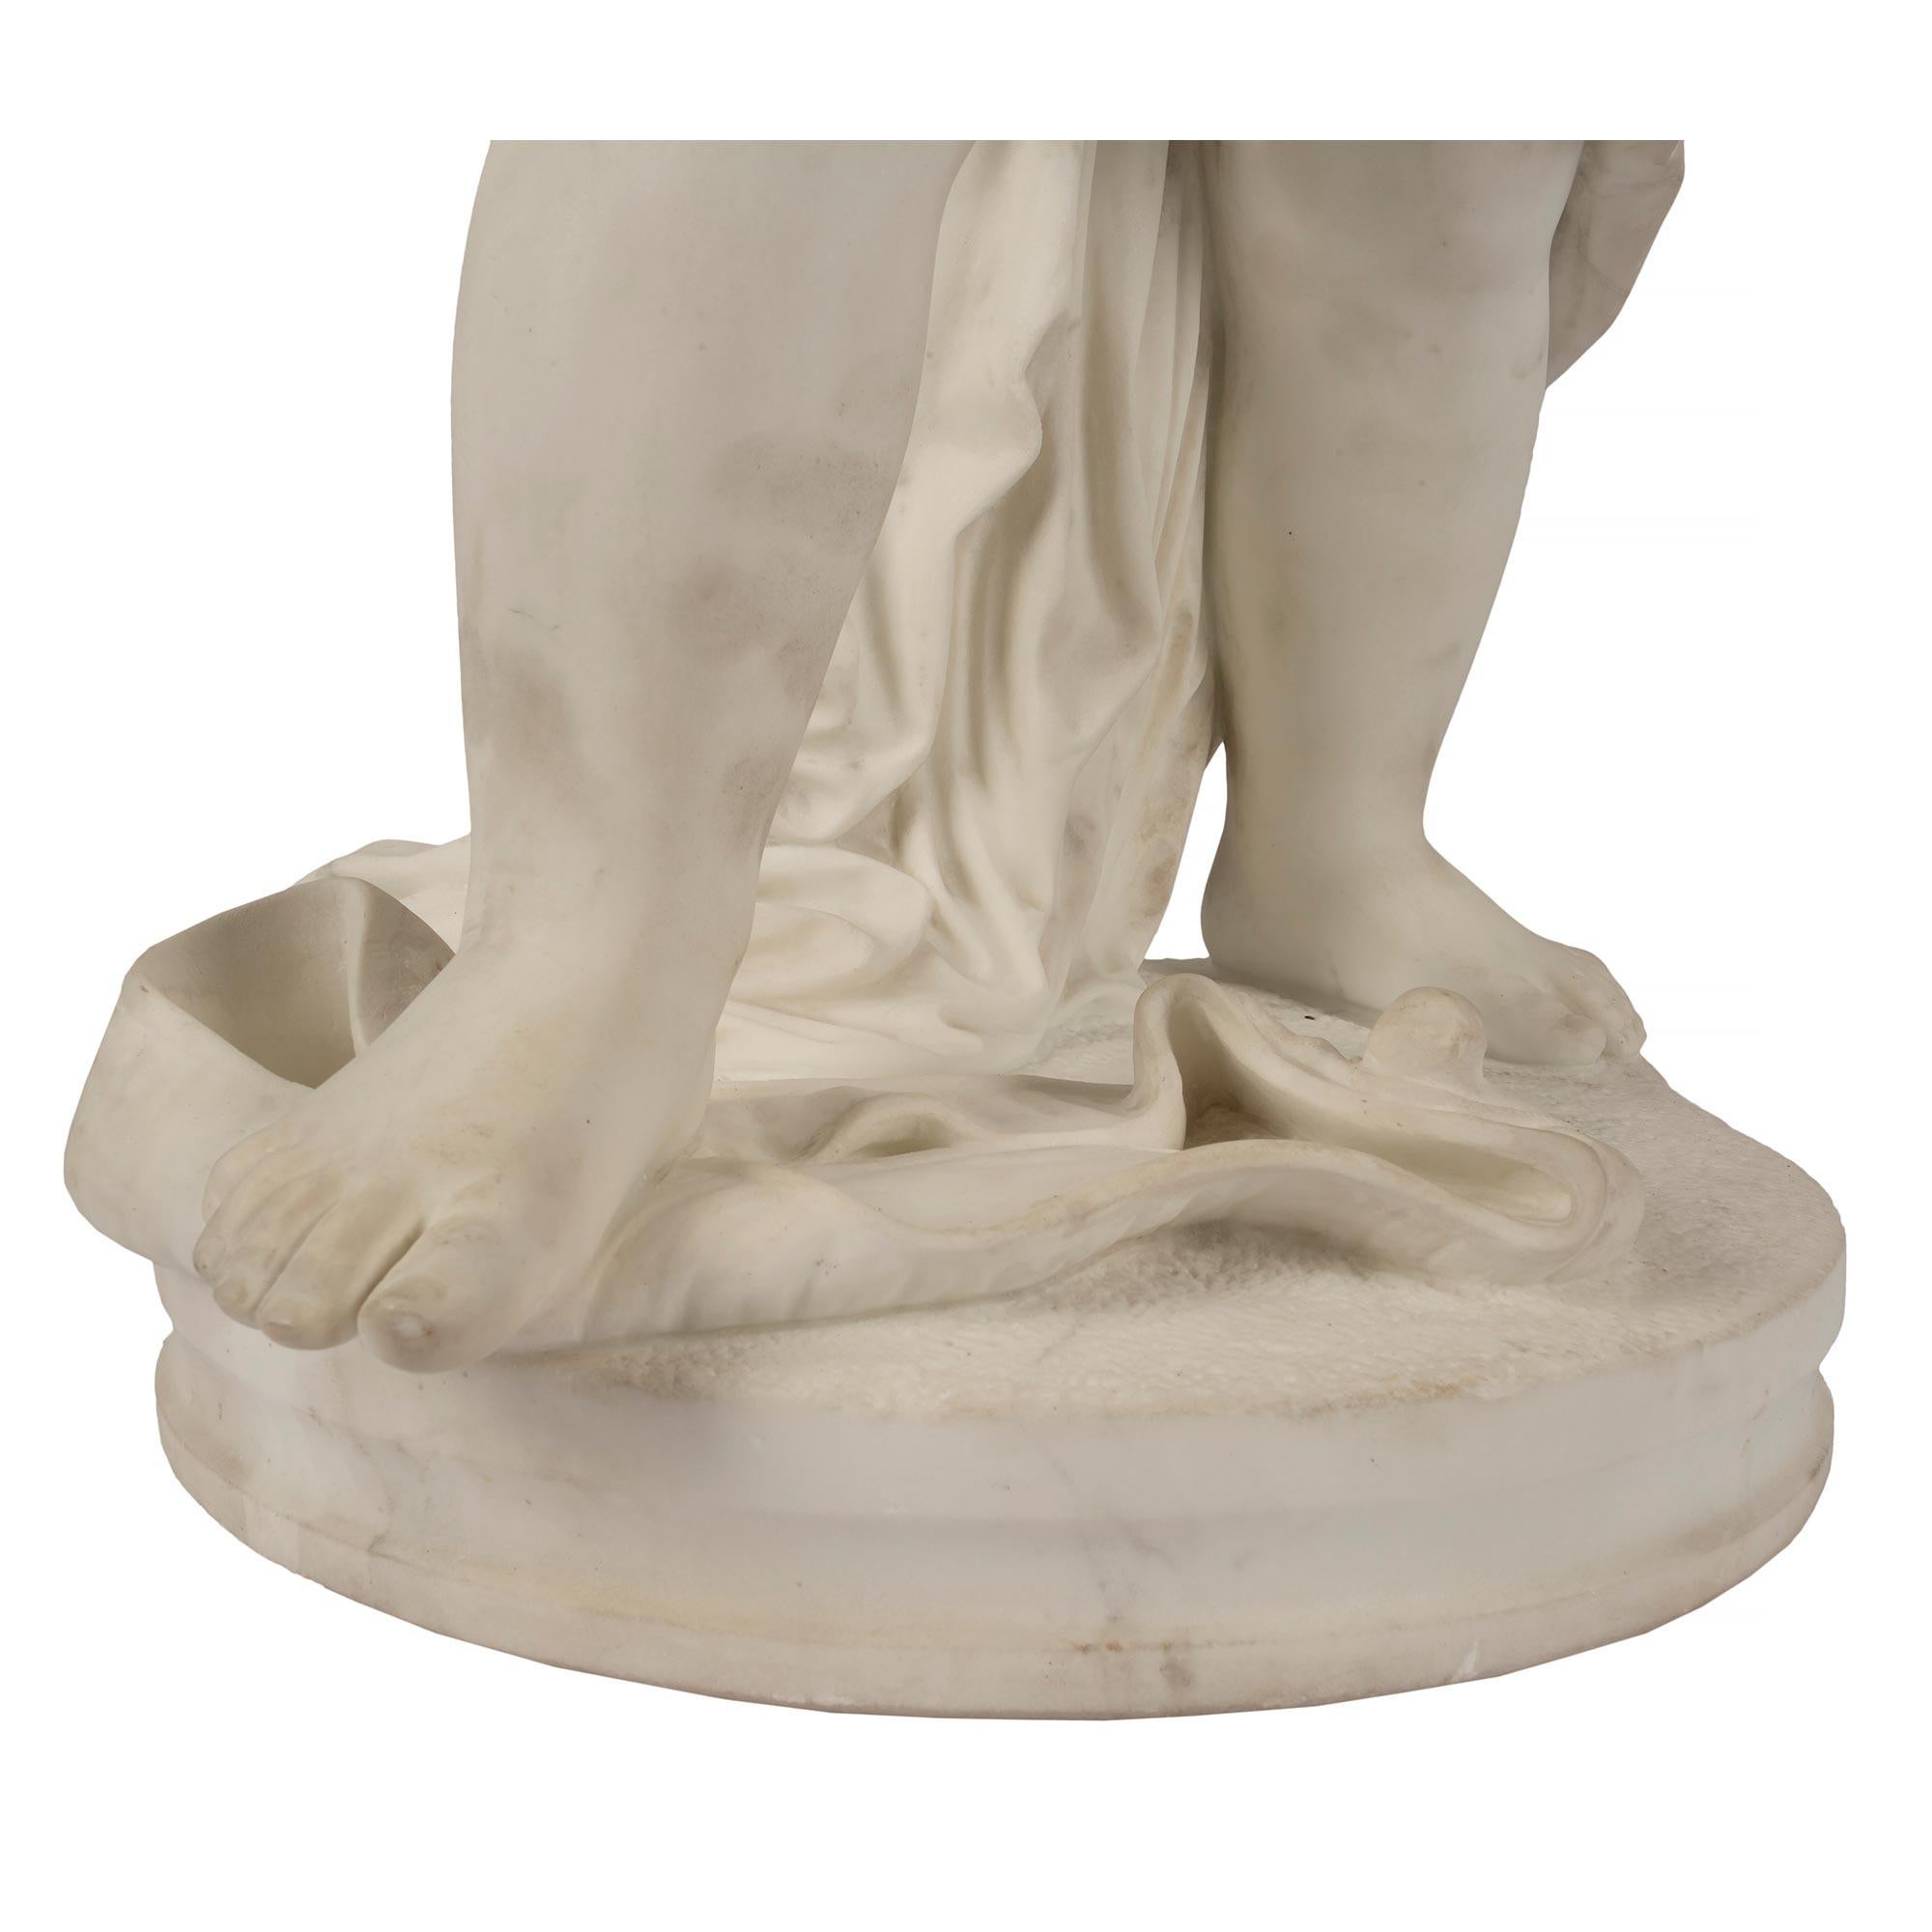 Italian 19th Century White Carrara Marble Statue of a Young Boy For Sale 6